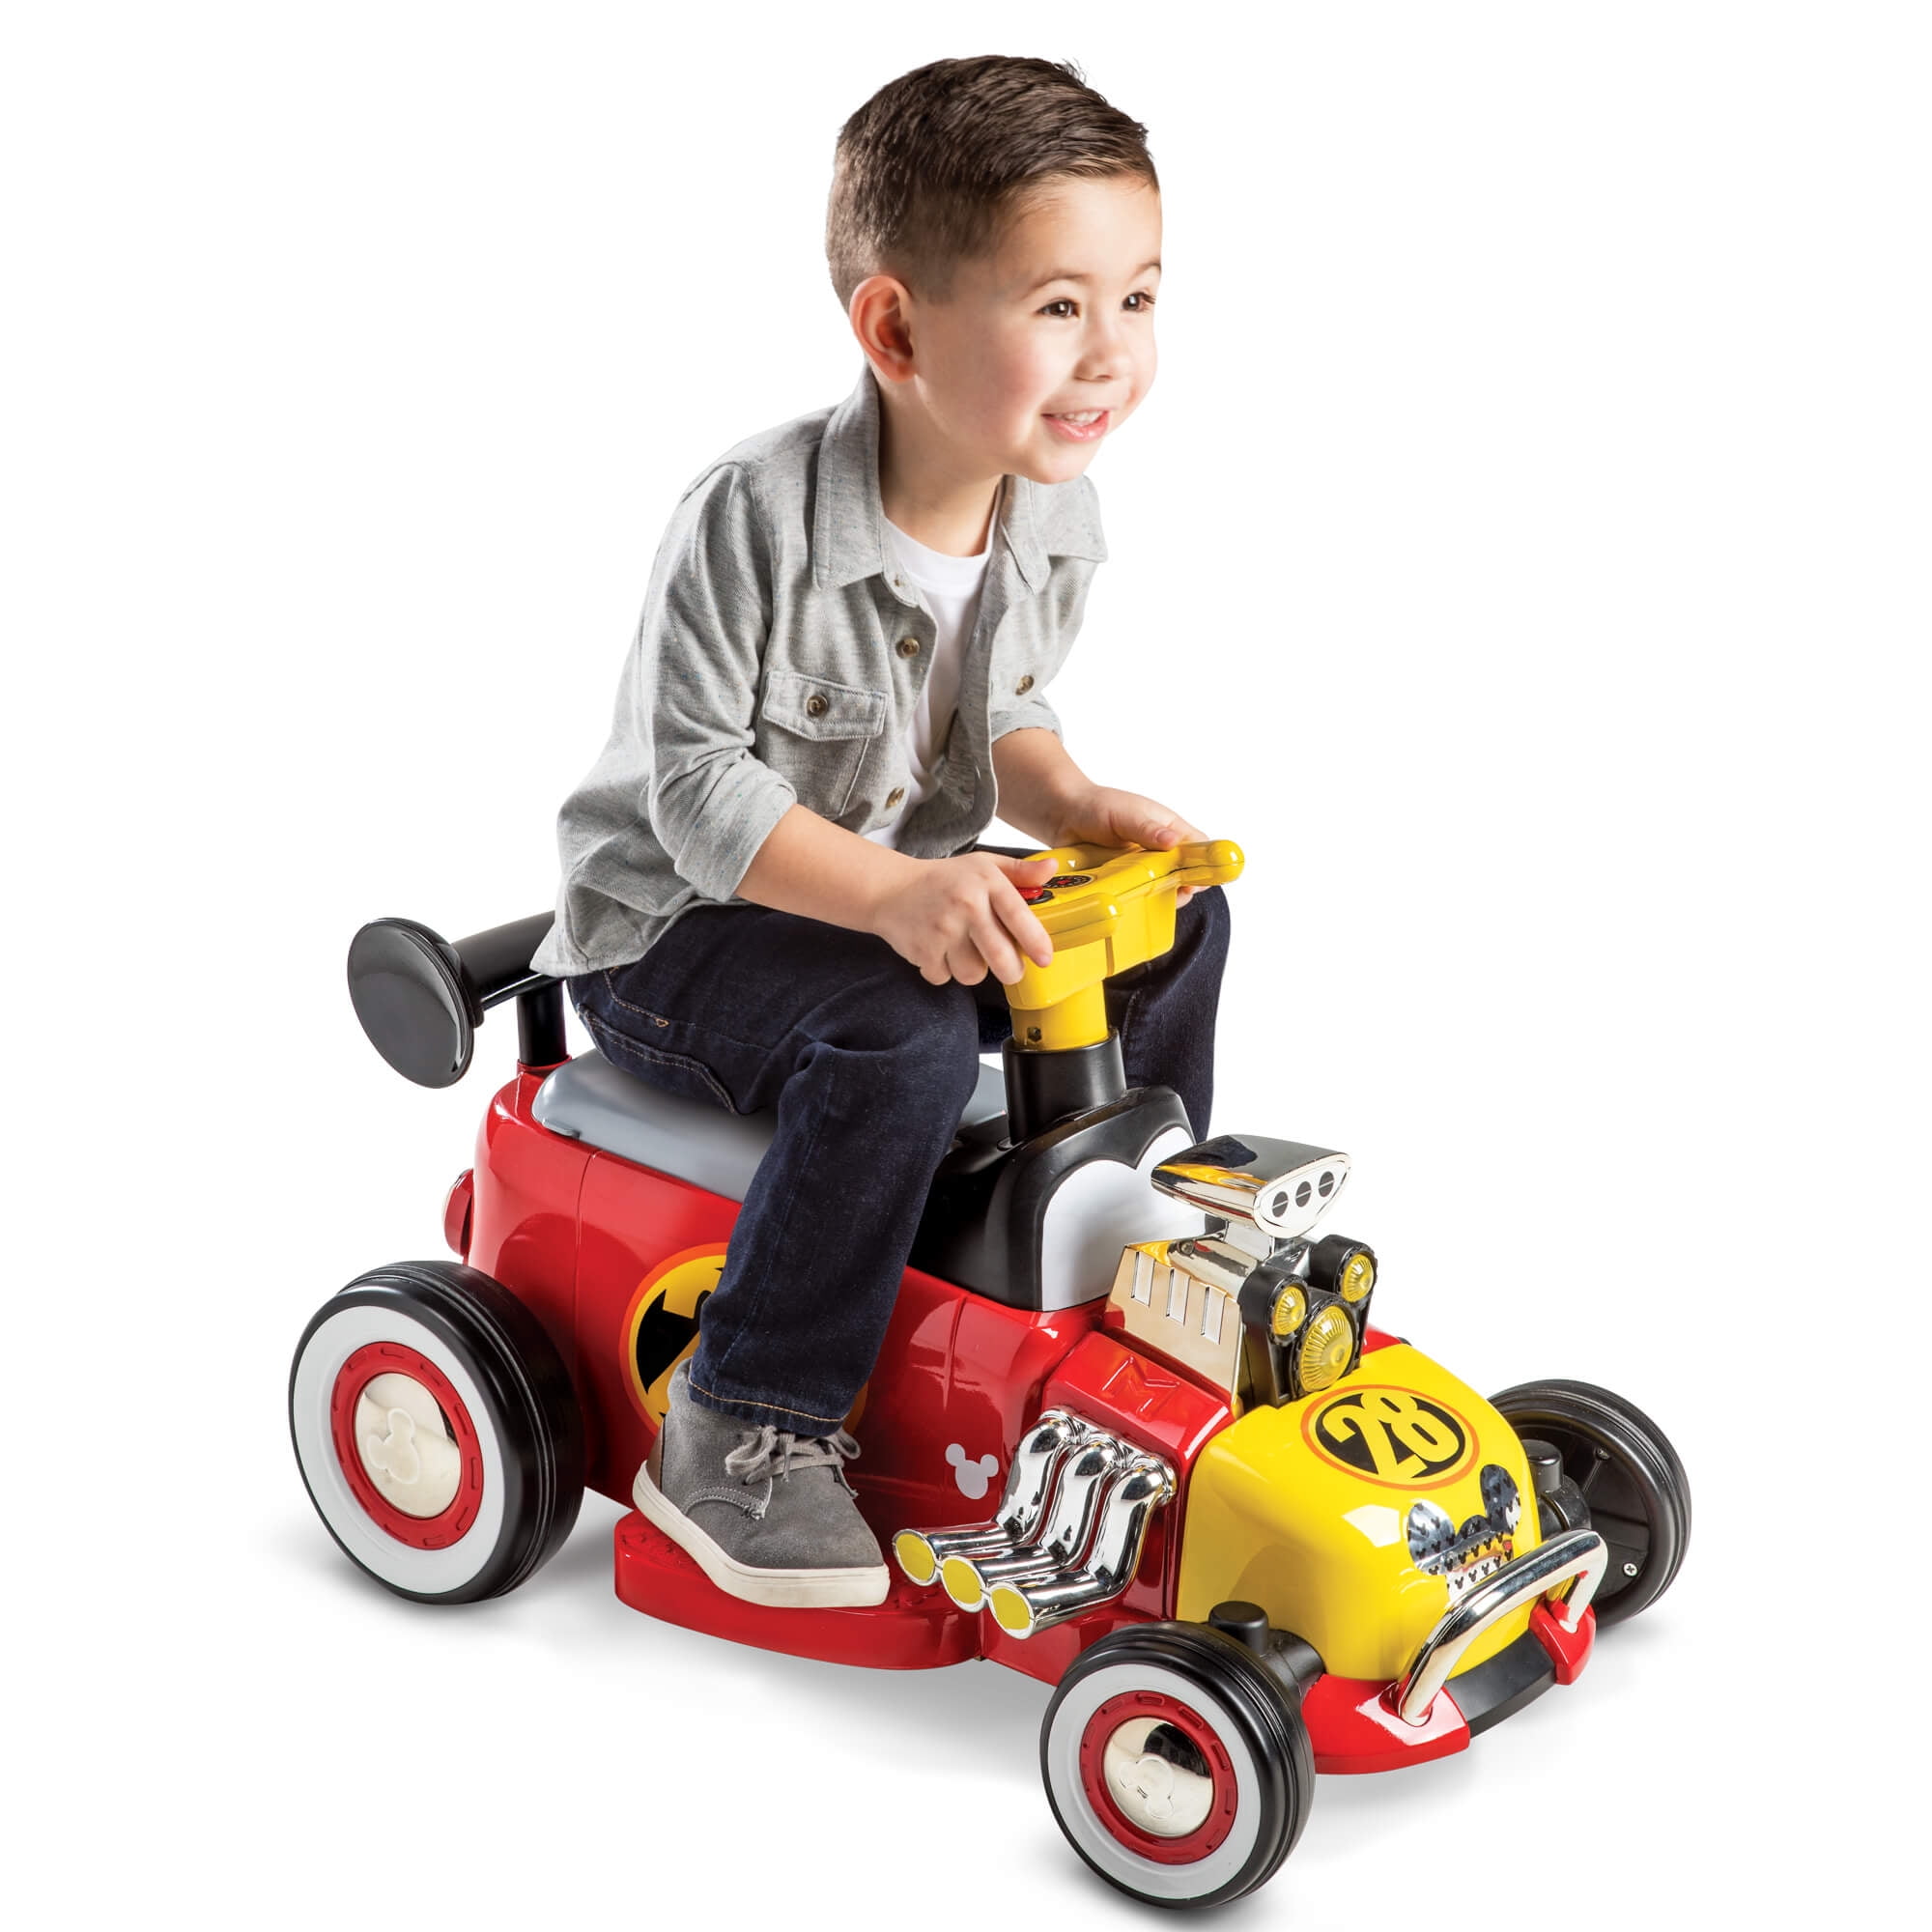 24 volt battery powered ride on toys